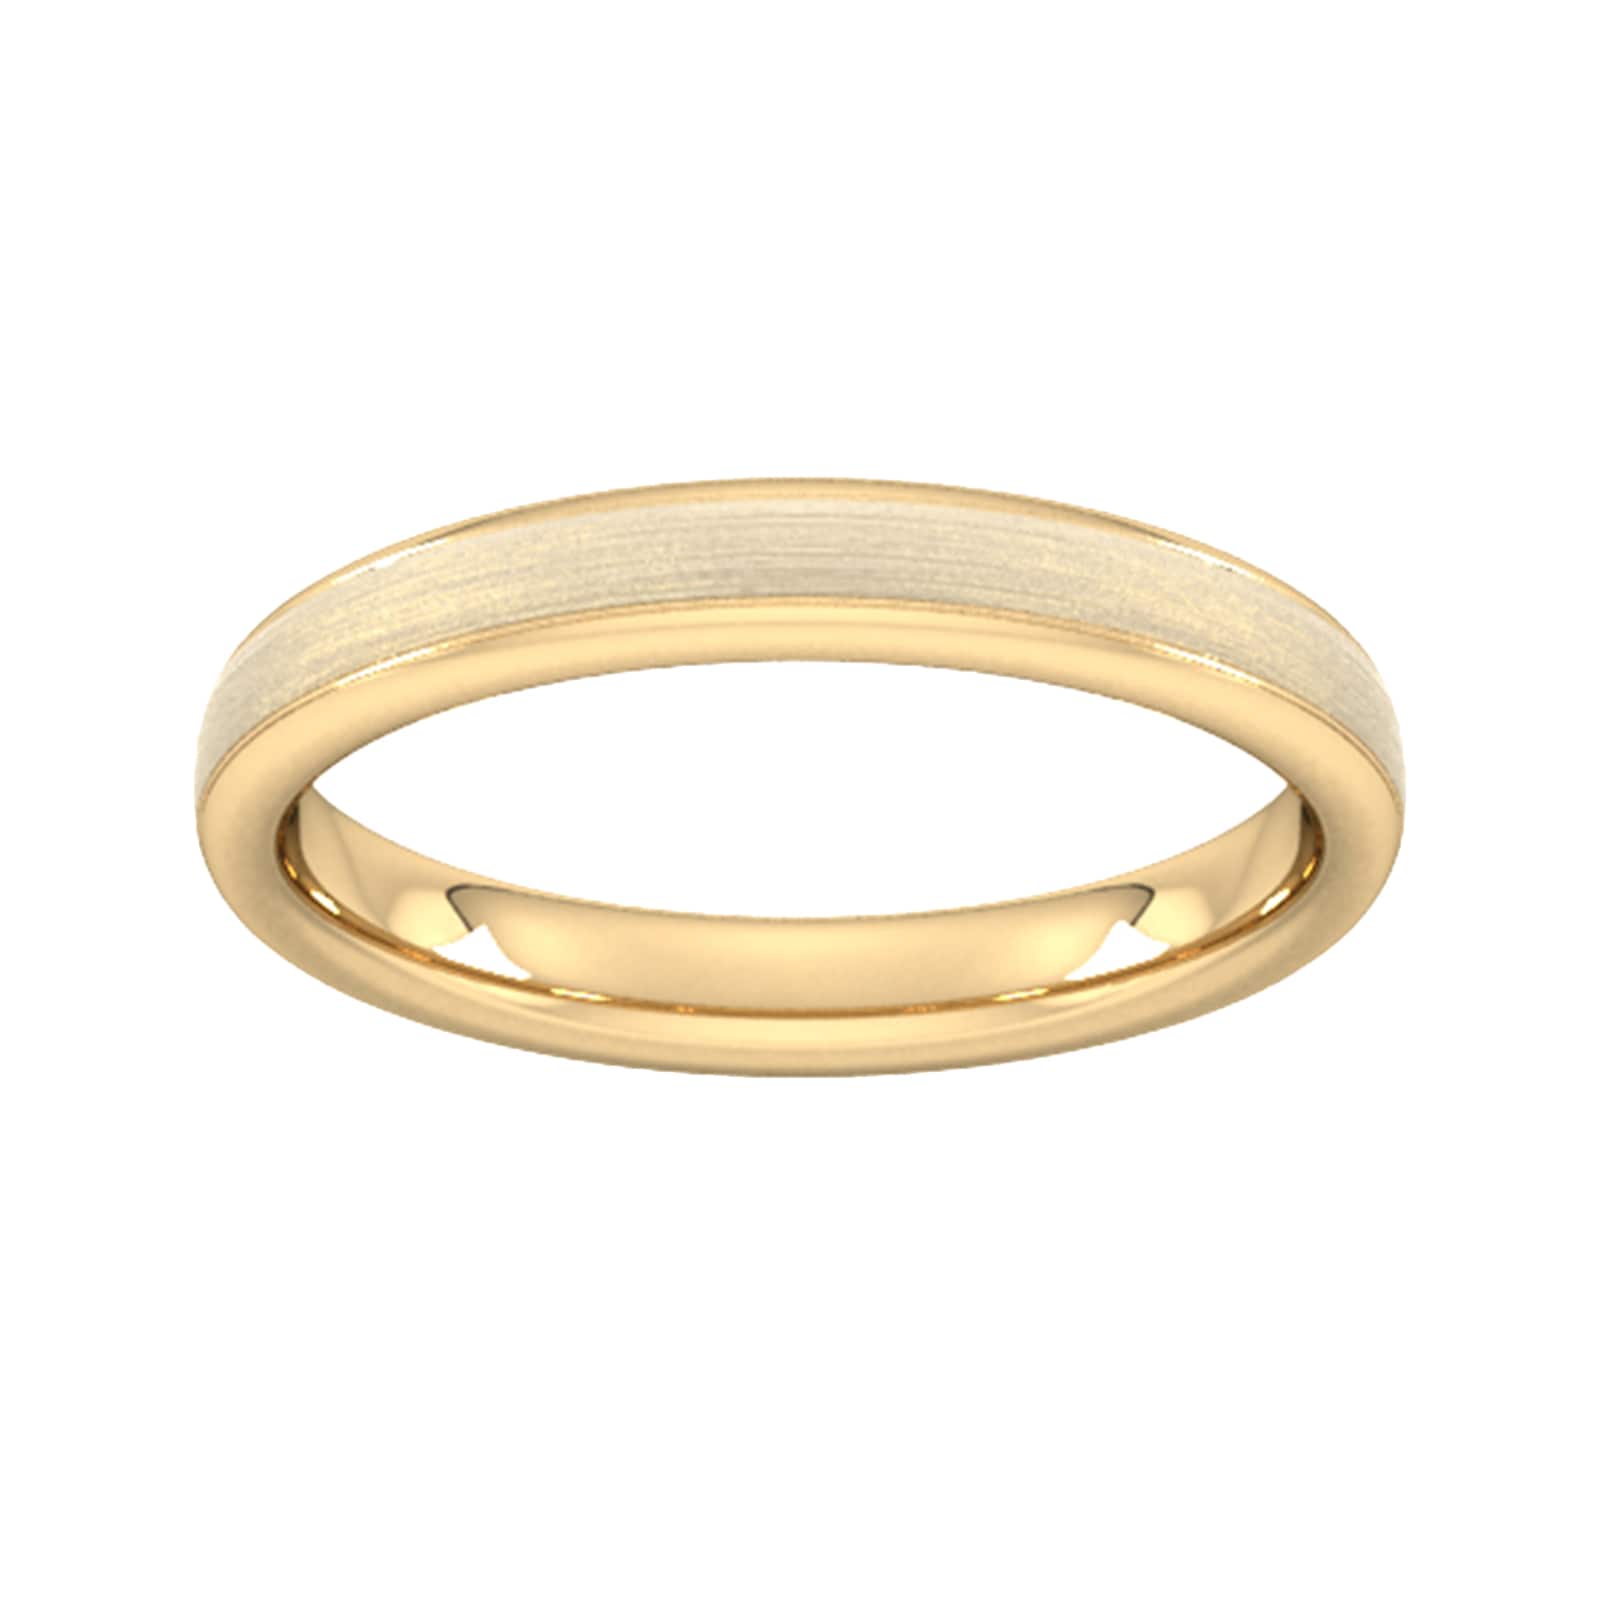 3mm Flat Court Heavy Matt Centre With Grooves Wedding Ring In 9 Carat Yellow Gold - Ring Size U